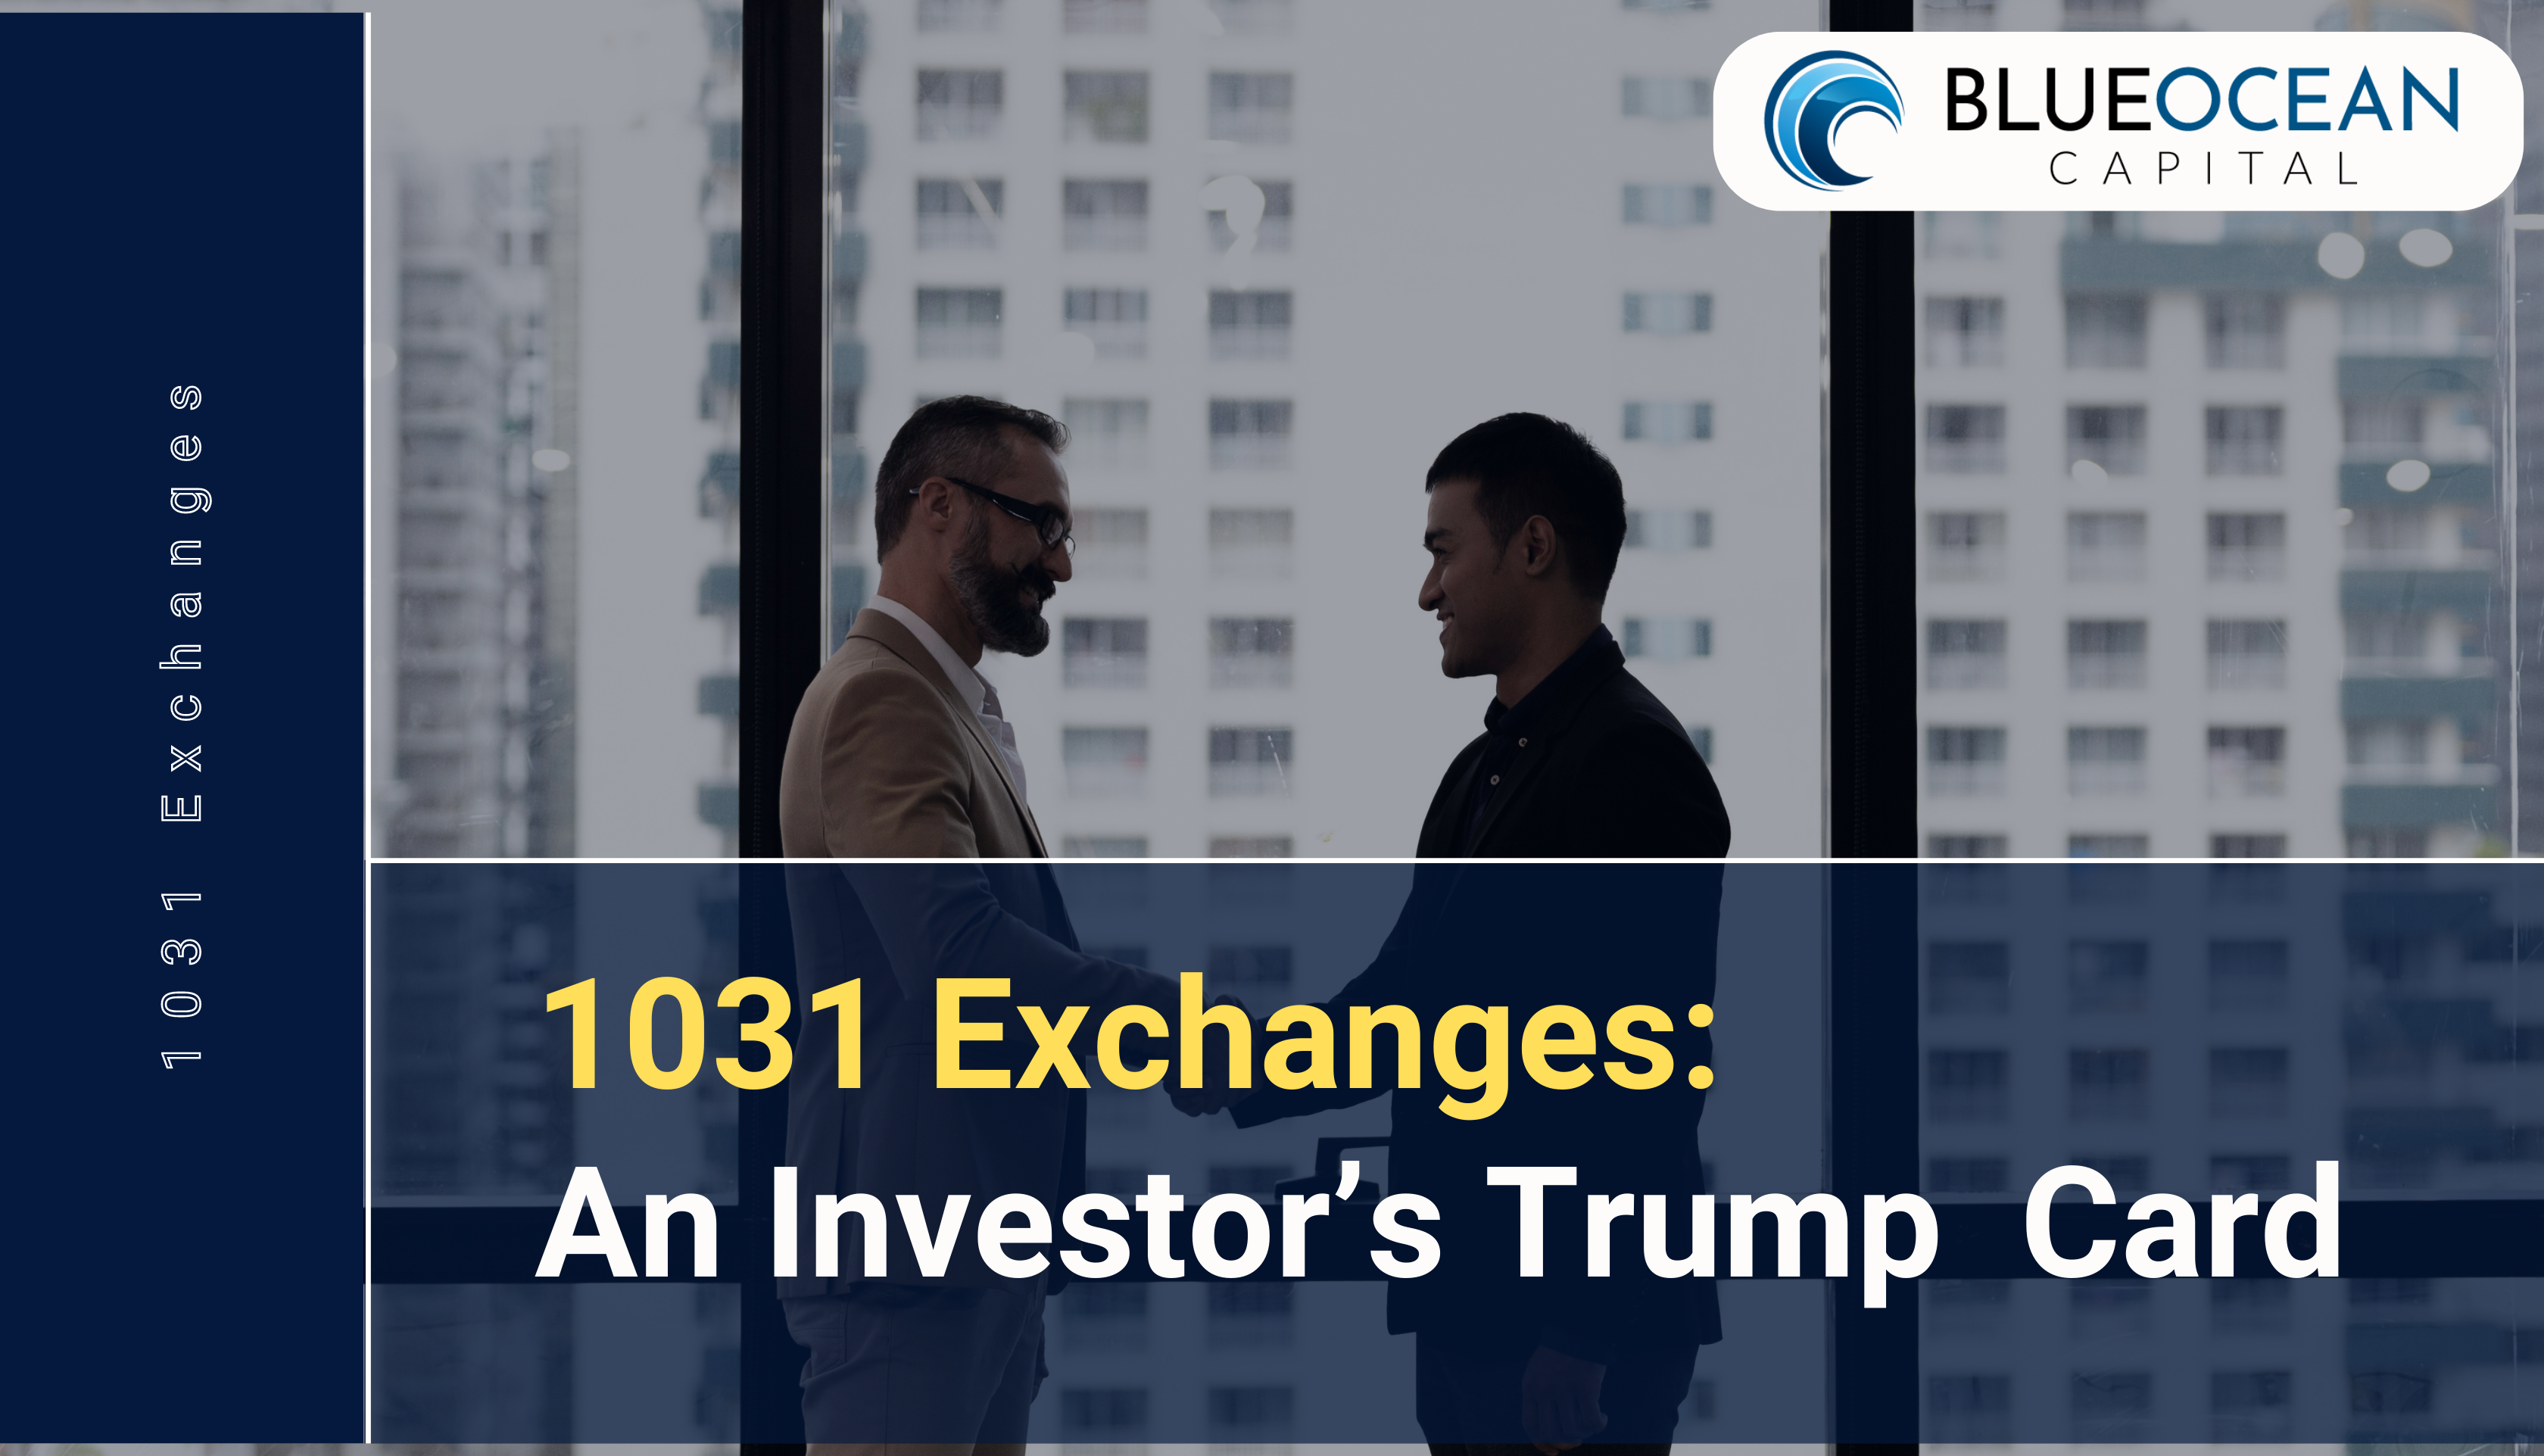 1031 Exchanges: An Investor’s Trump Card